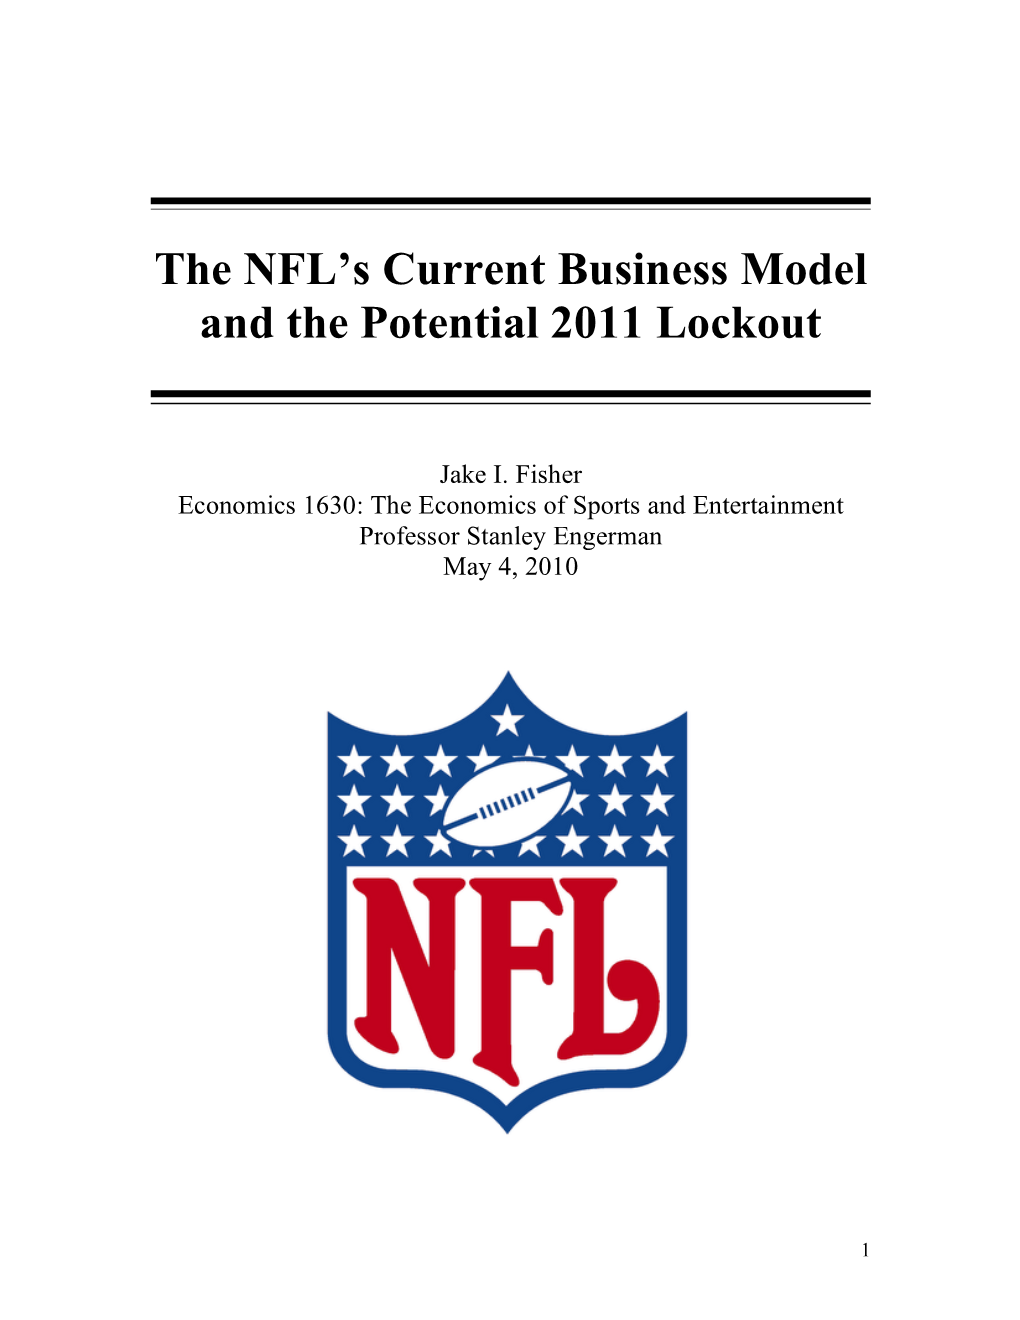 The NFL's Current Business Model and the Potential 2011 Lockout